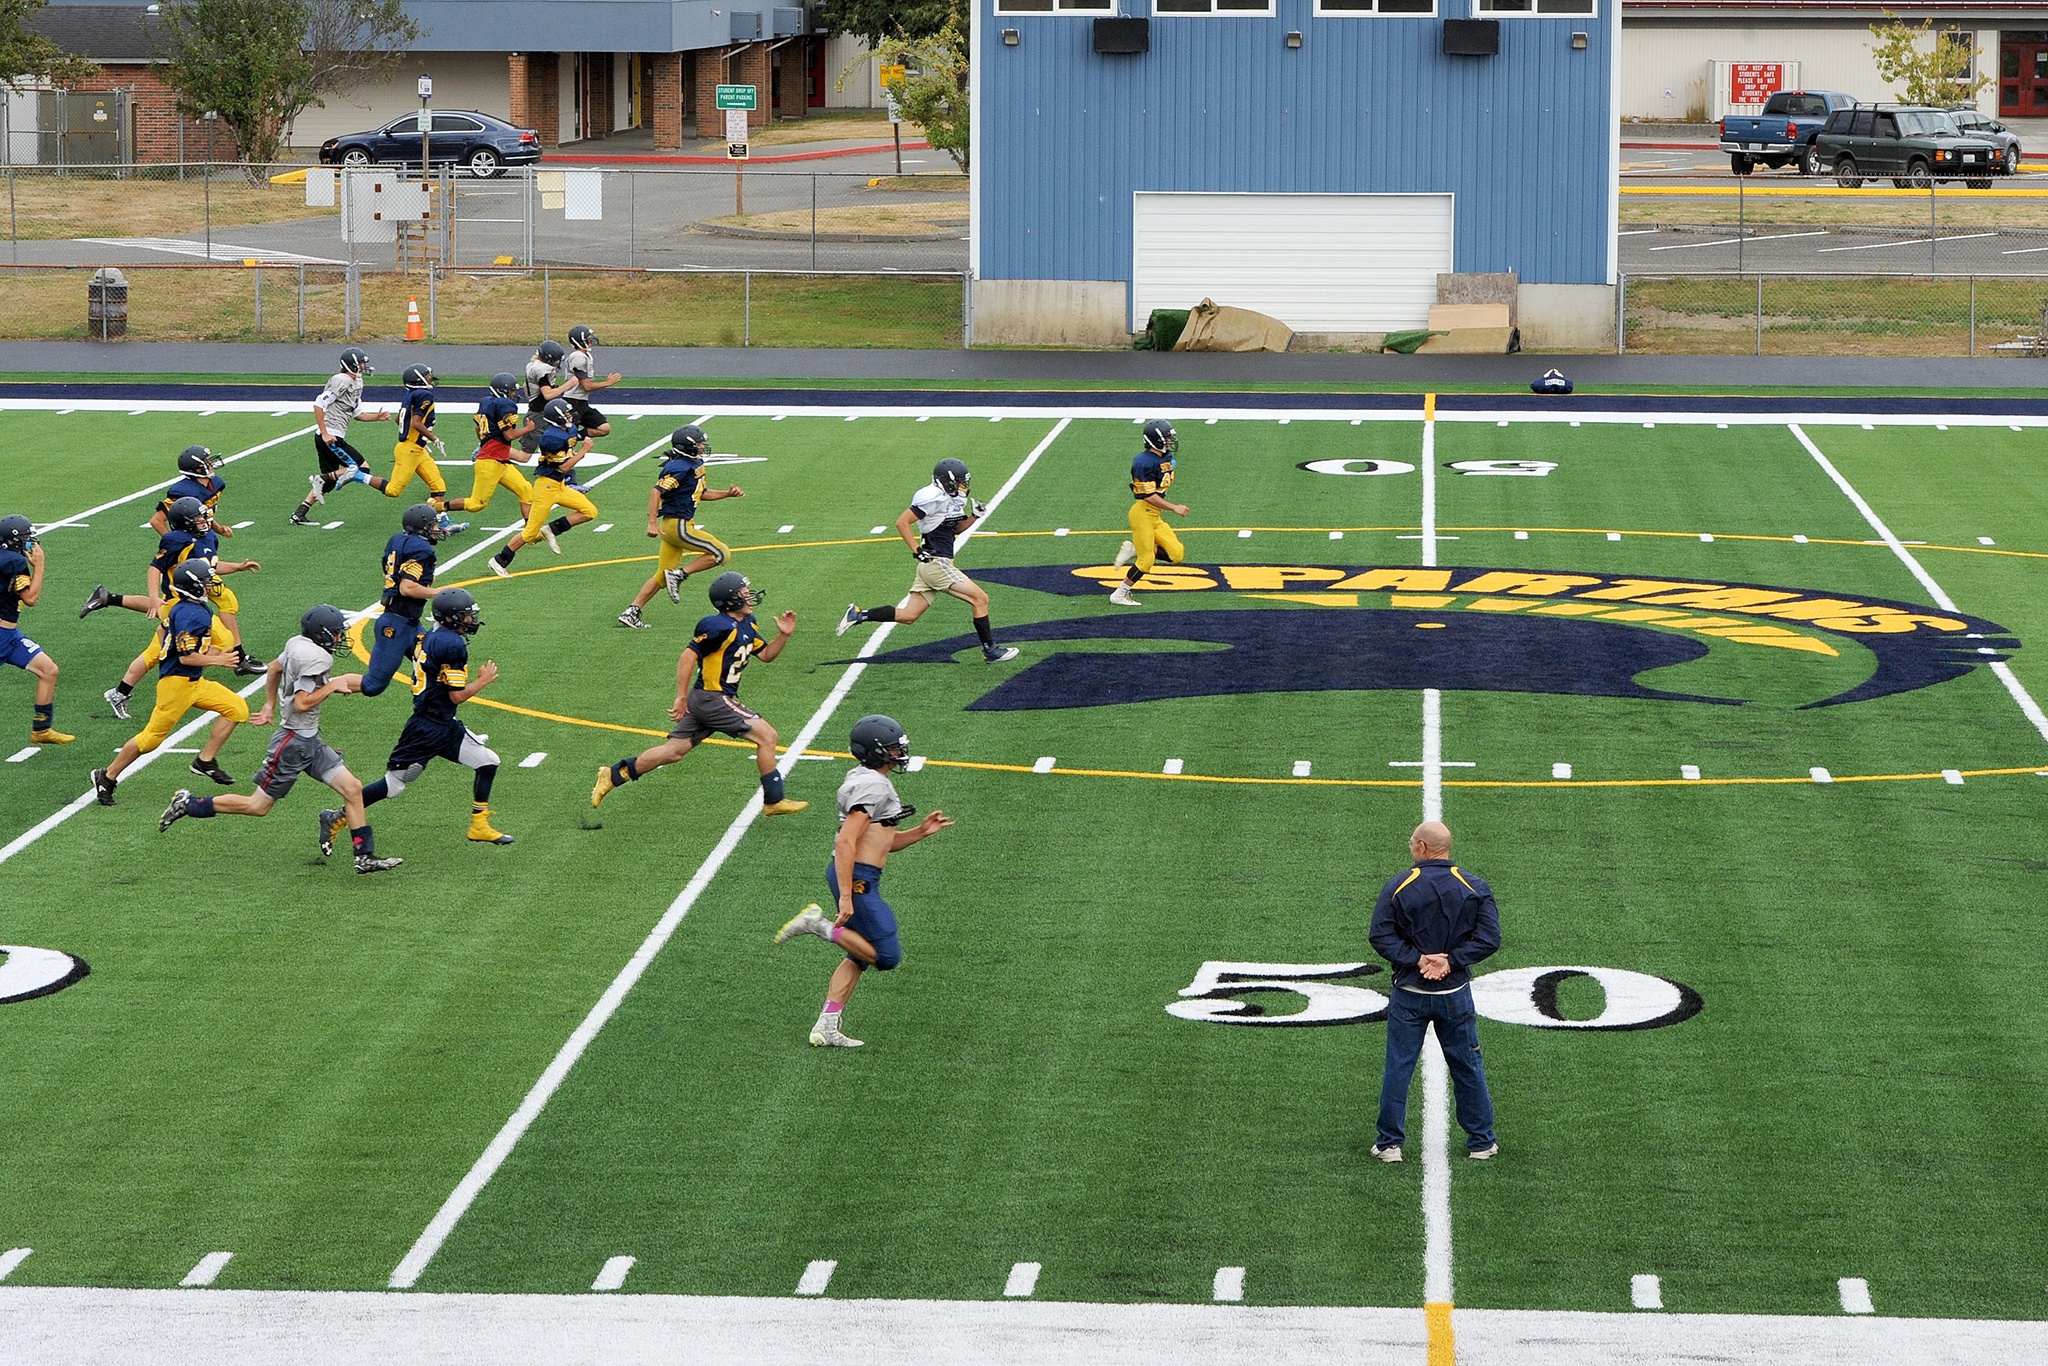 Lonnie Archibald/For Peninsula Daily News Forks assistant coach Jimmy Leppell looks on as players run sprints during the football team’s first practice Tuesday on the new Spartan Stadium FieldTurf playing surface.